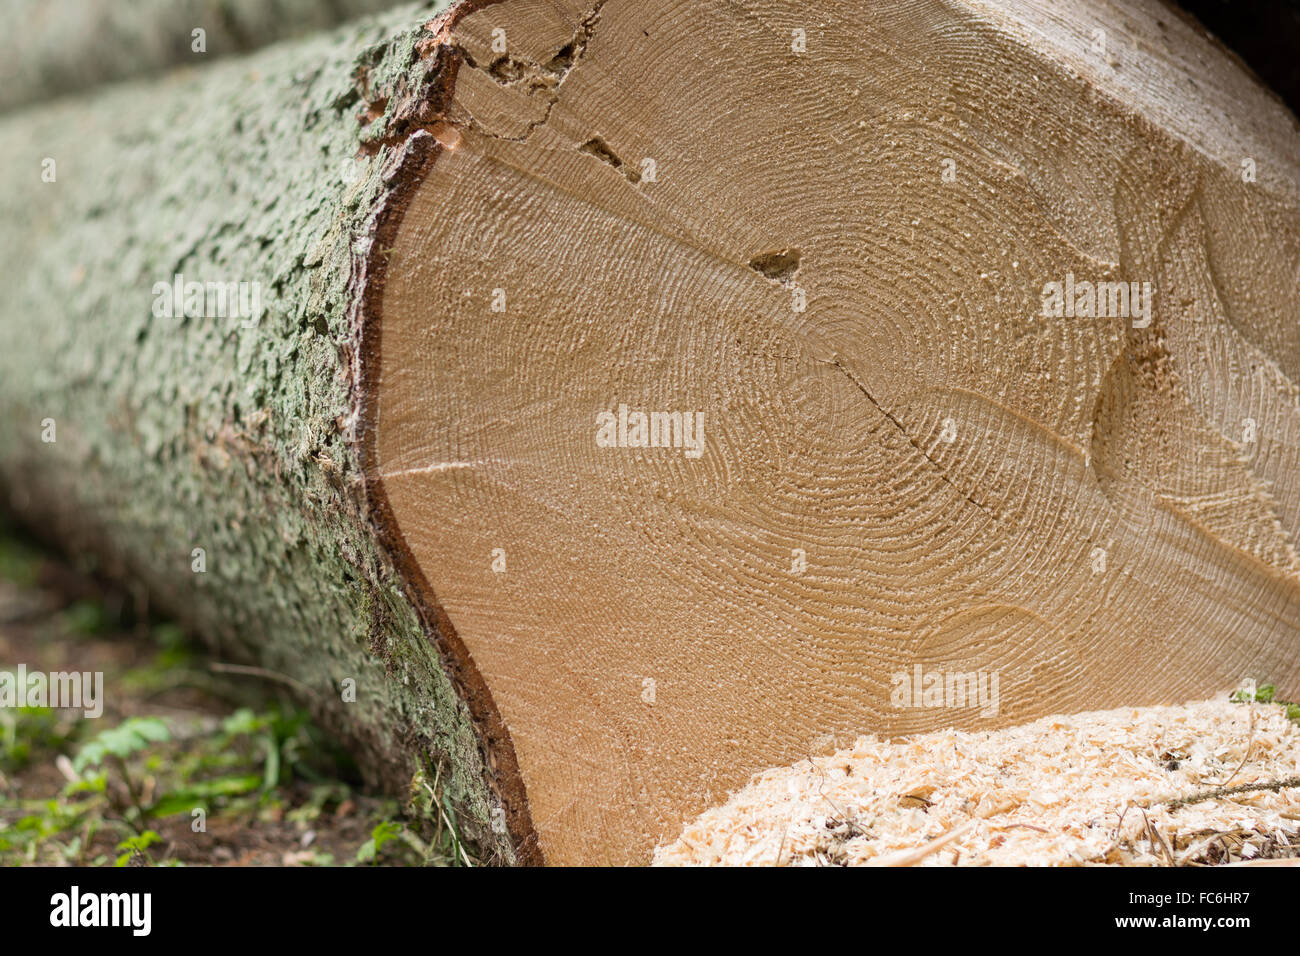 Growth rings in tree trunk felled Stock Photo